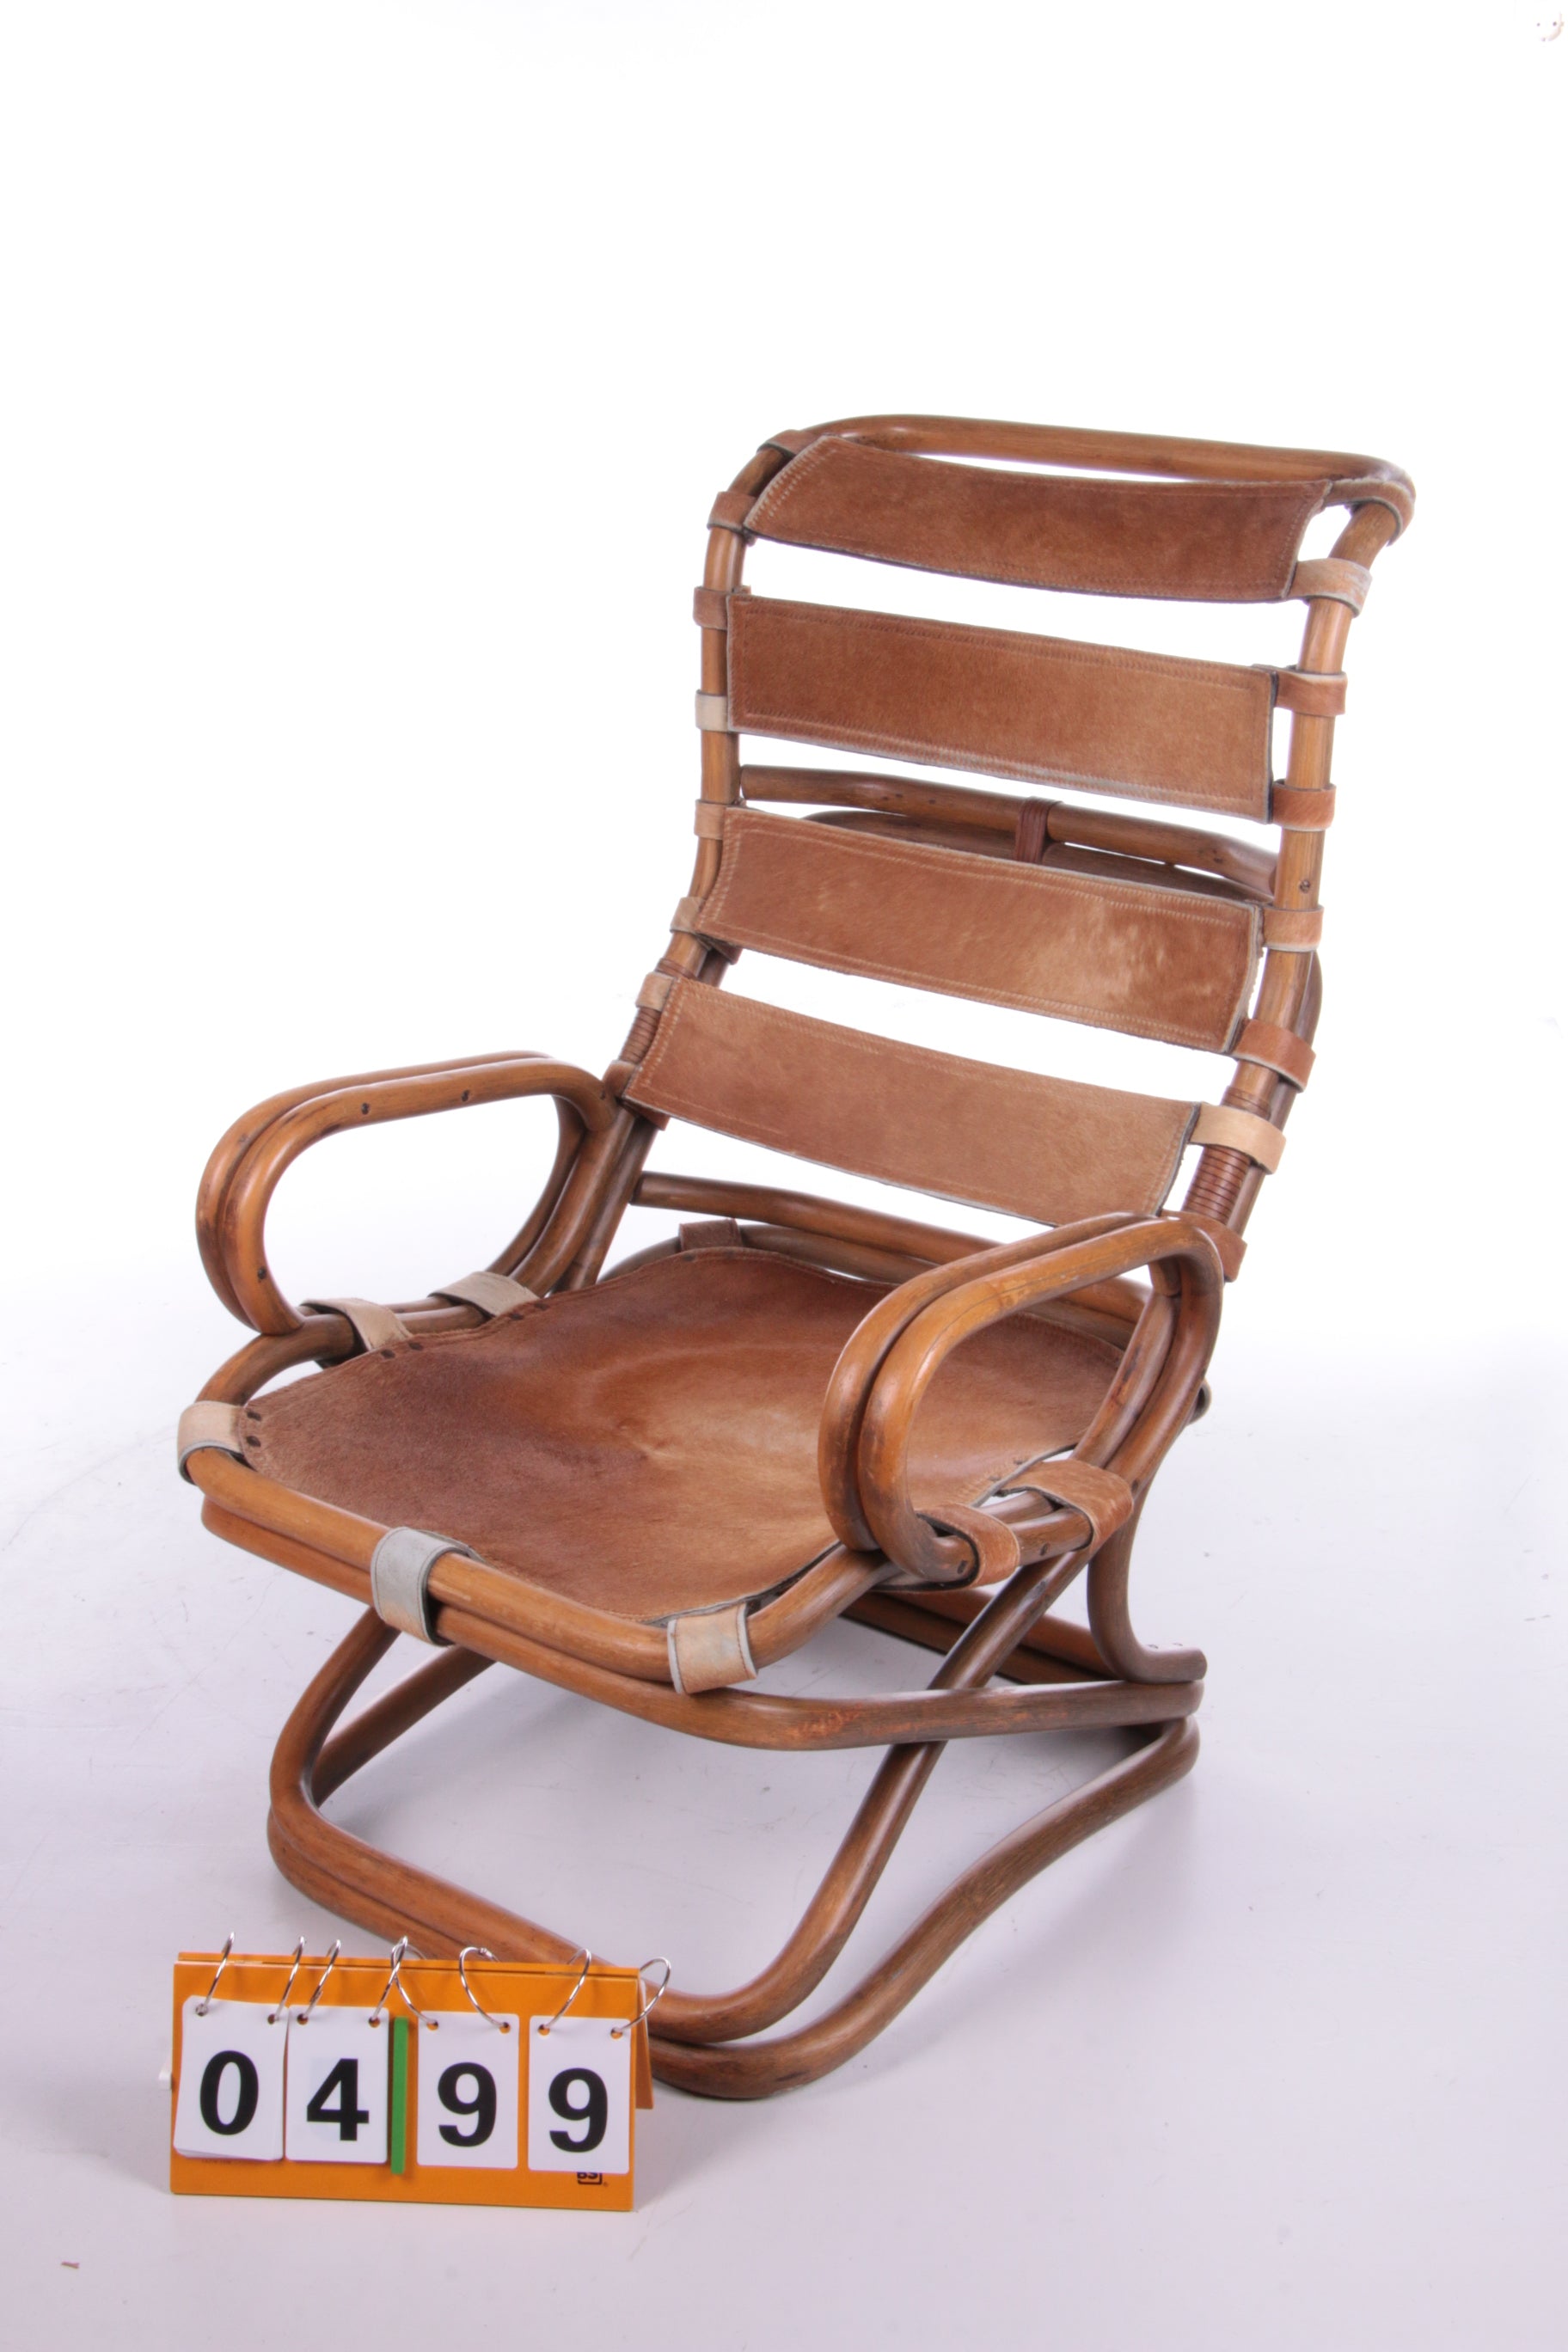 bus Chemie mentaal Tito Agnoli Relax chair made of Bamboo and leather,1960s – Timeless-Art